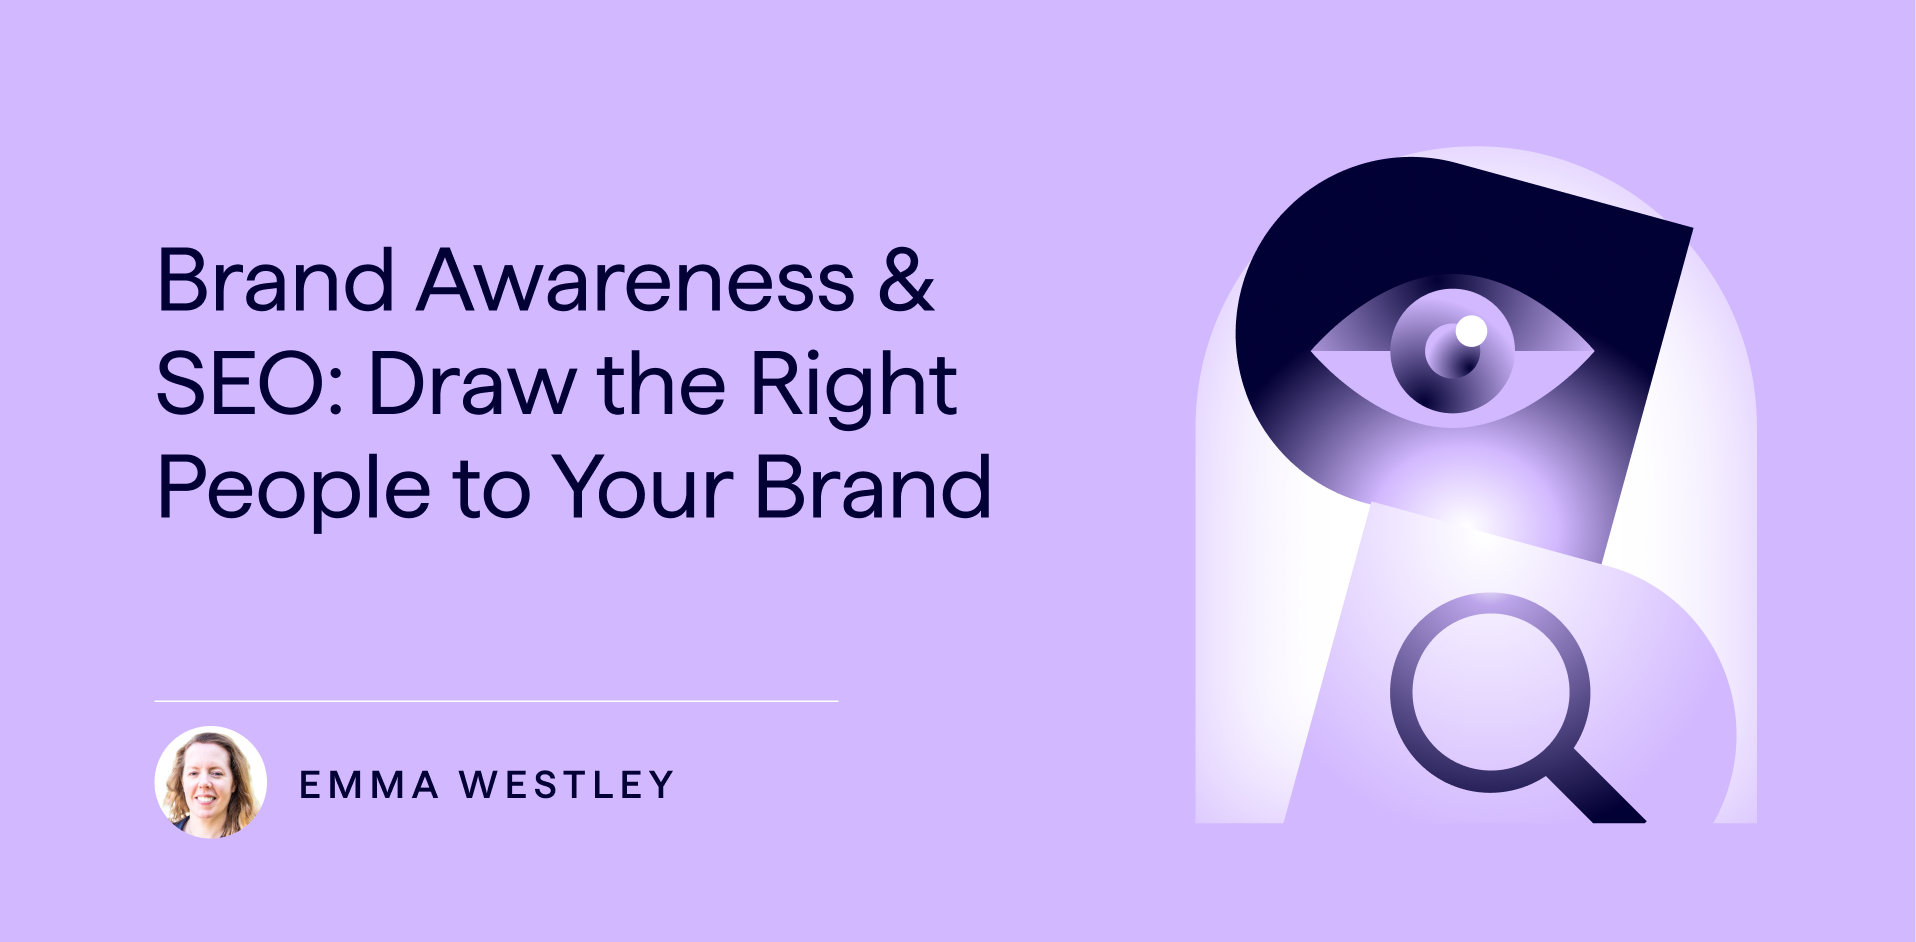 Brand Awareness & SEO: A Marketer’s Guide to Driving Business Visibility Through Organic Search Strategies 